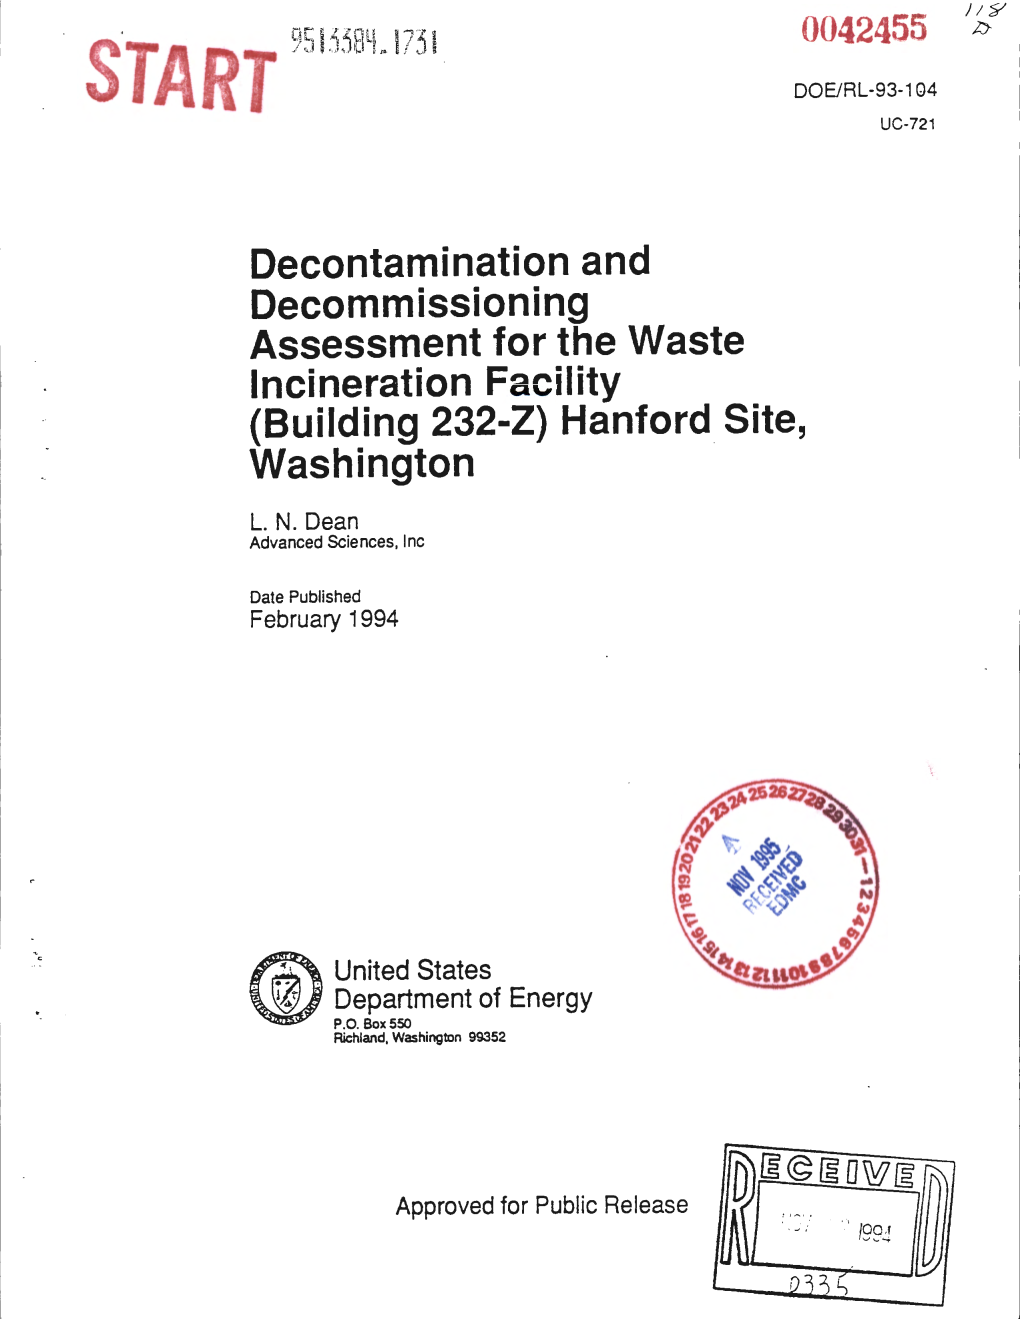 Decontamination and Decommissioning Assessment for the Waste Incineration Facility (Building 232-Z) Hanford Site, Washington